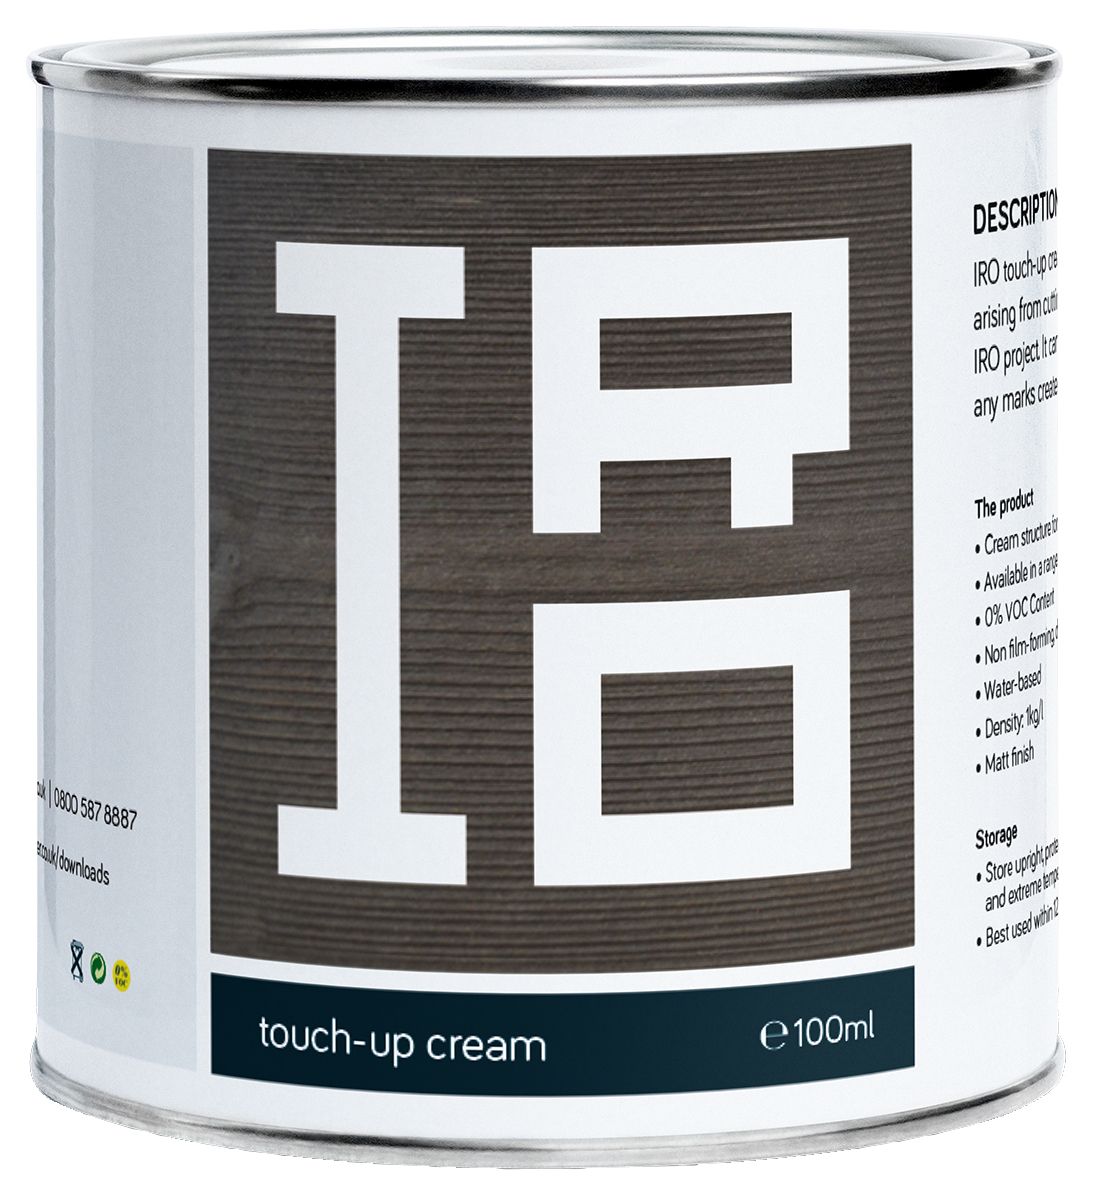 Image of IRO Charcoal Black Protective Colour Touch Up Cream - 100ml